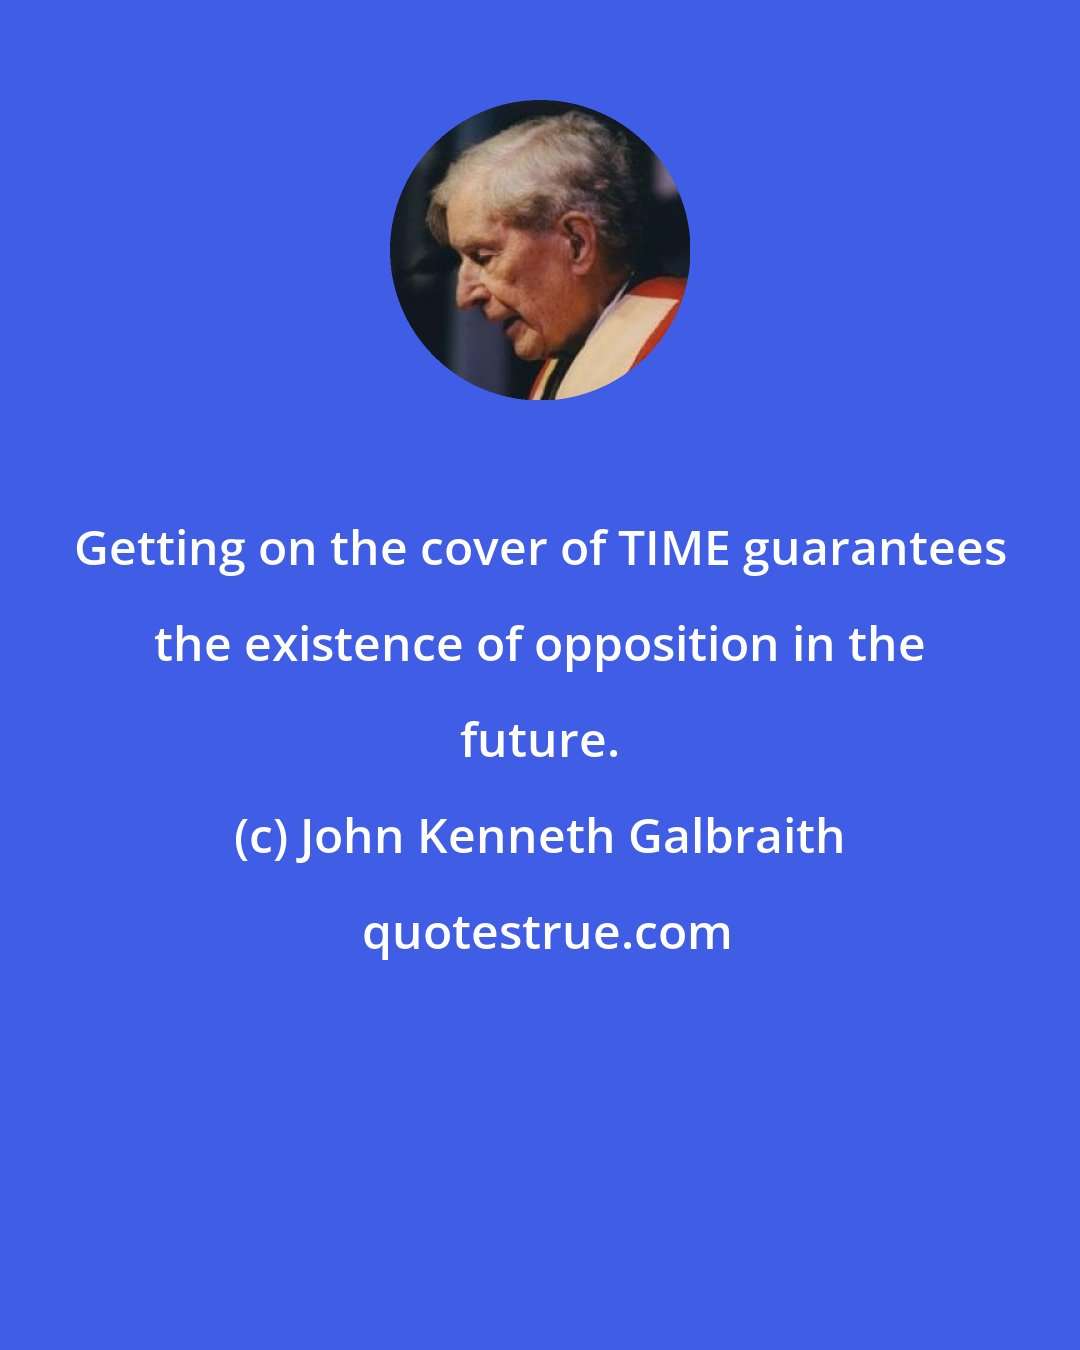 John Kenneth Galbraith: Getting on the cover of TIME guarantees the existence of opposition in the future.